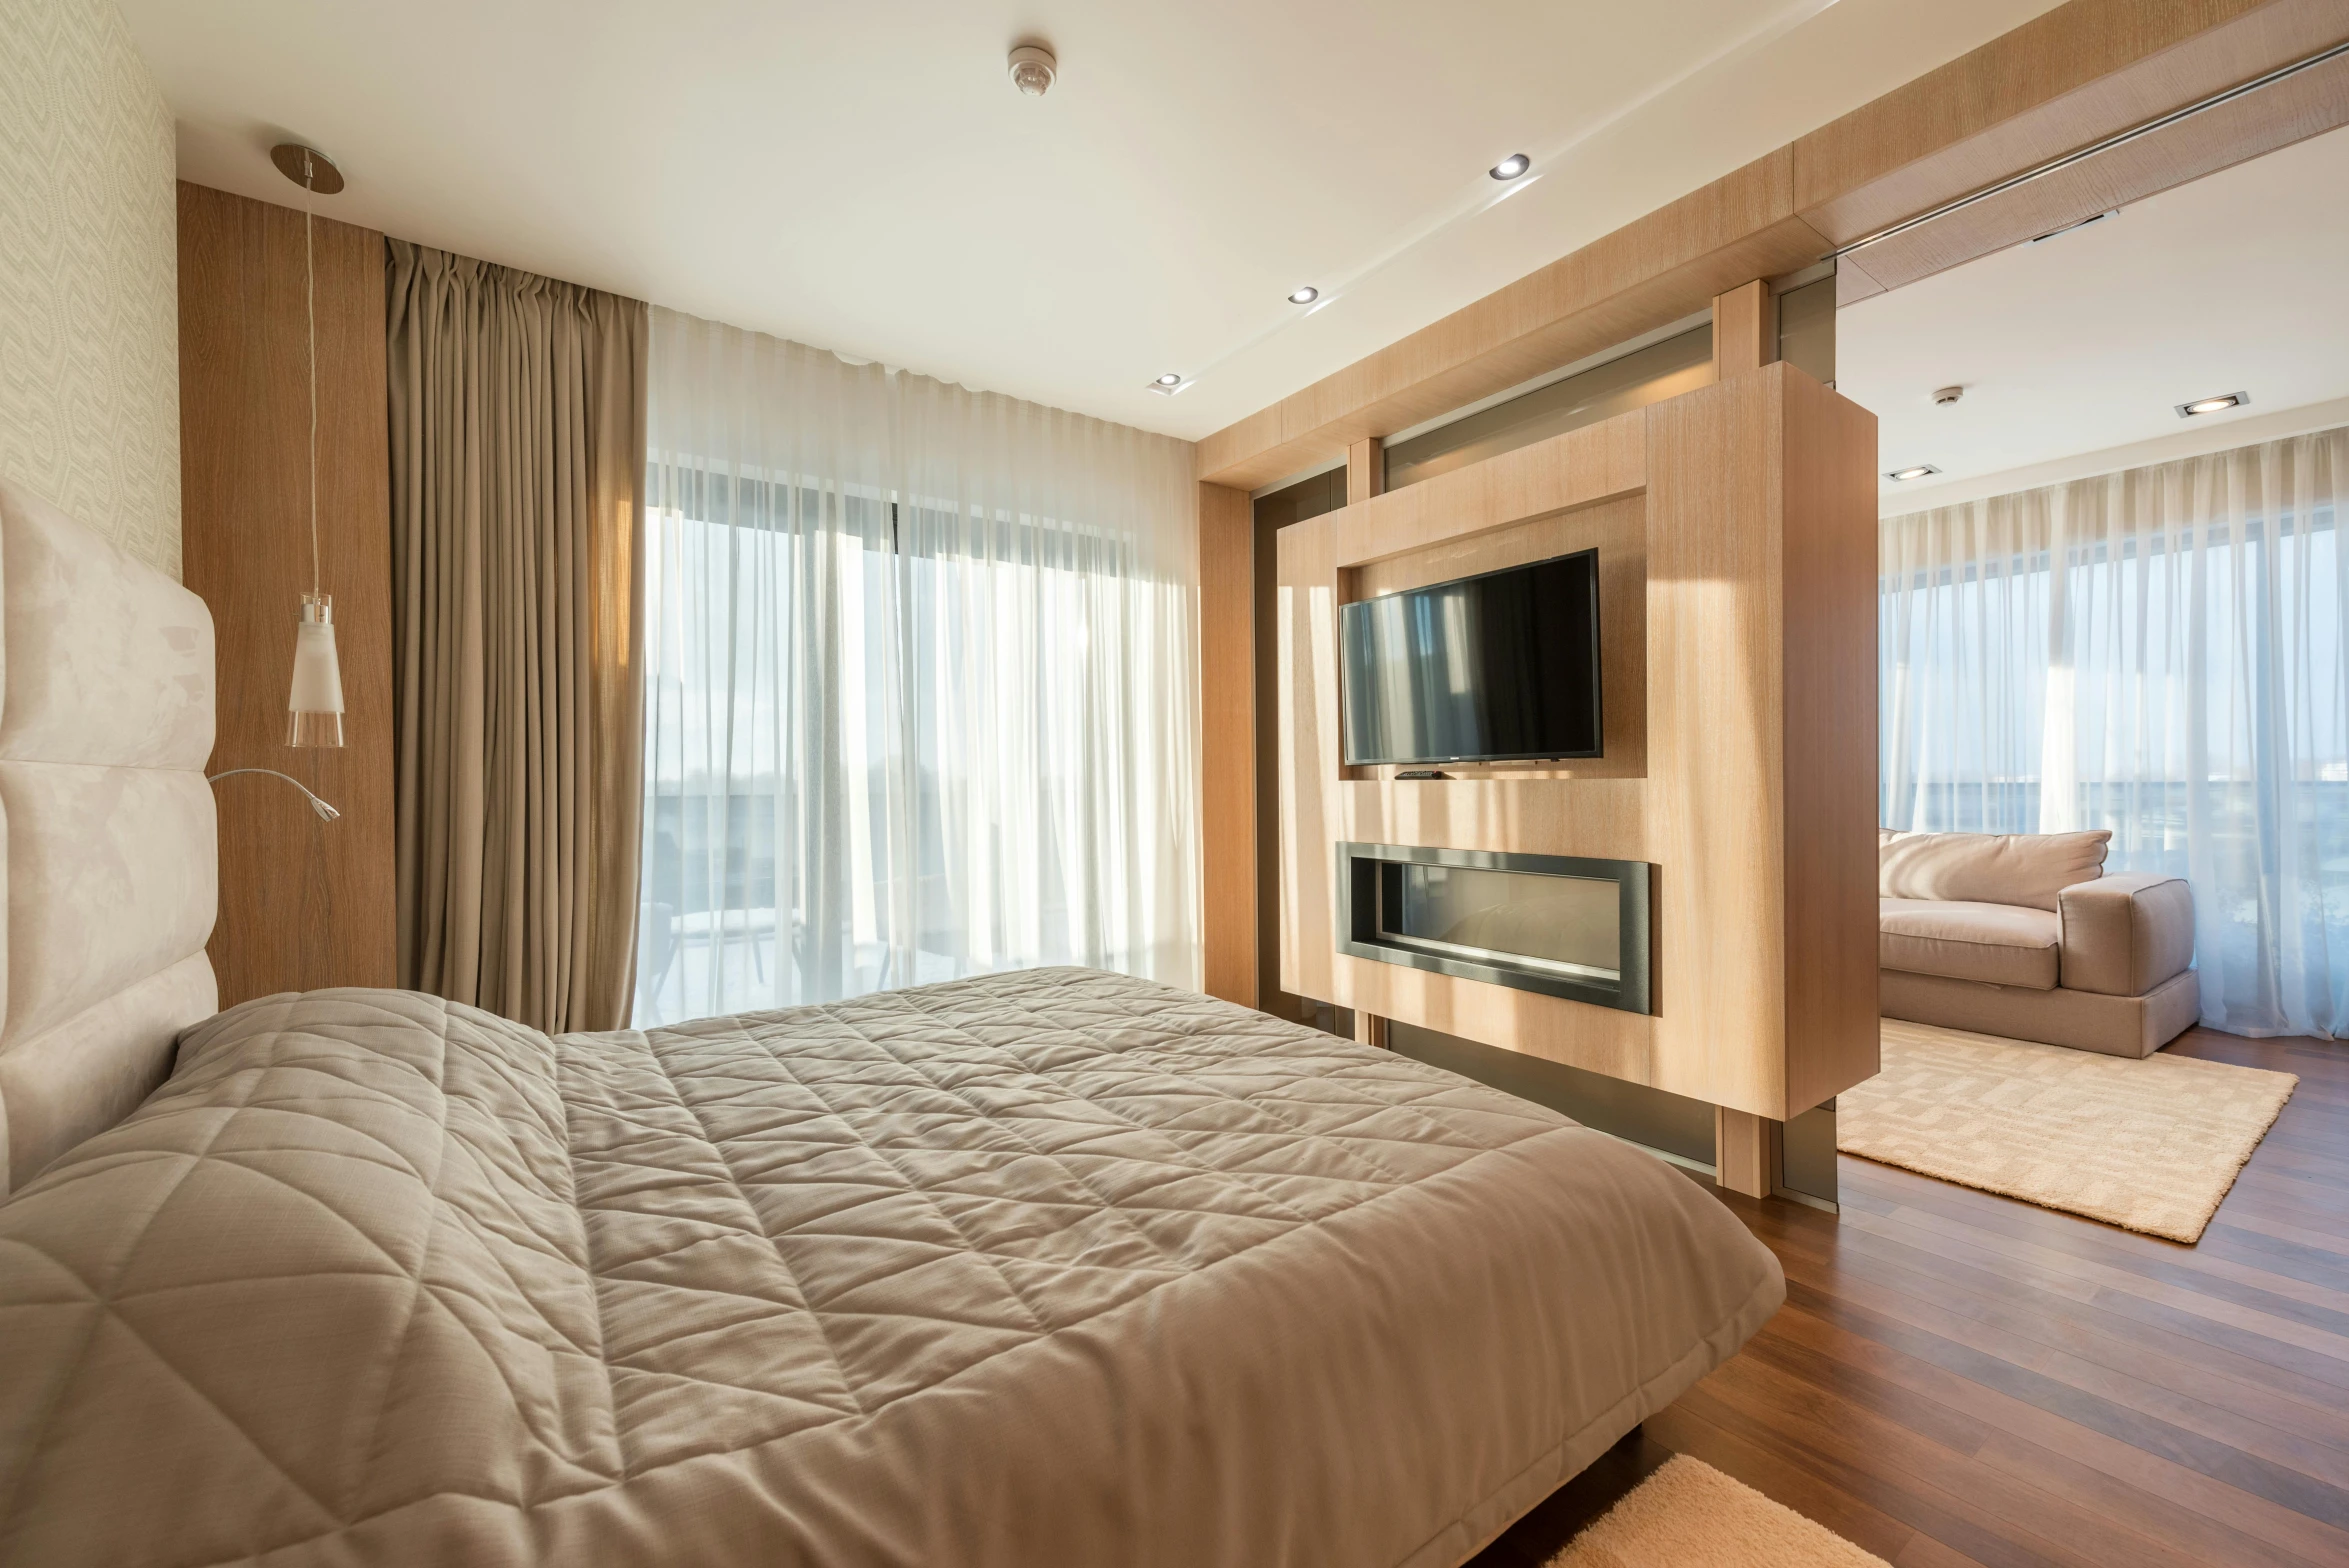 a bed room with a neatly made bed and a flat screen tv, by Alexander Fedosav, unsplash, beige and gold tones, penthouse, wooden floors, platinum